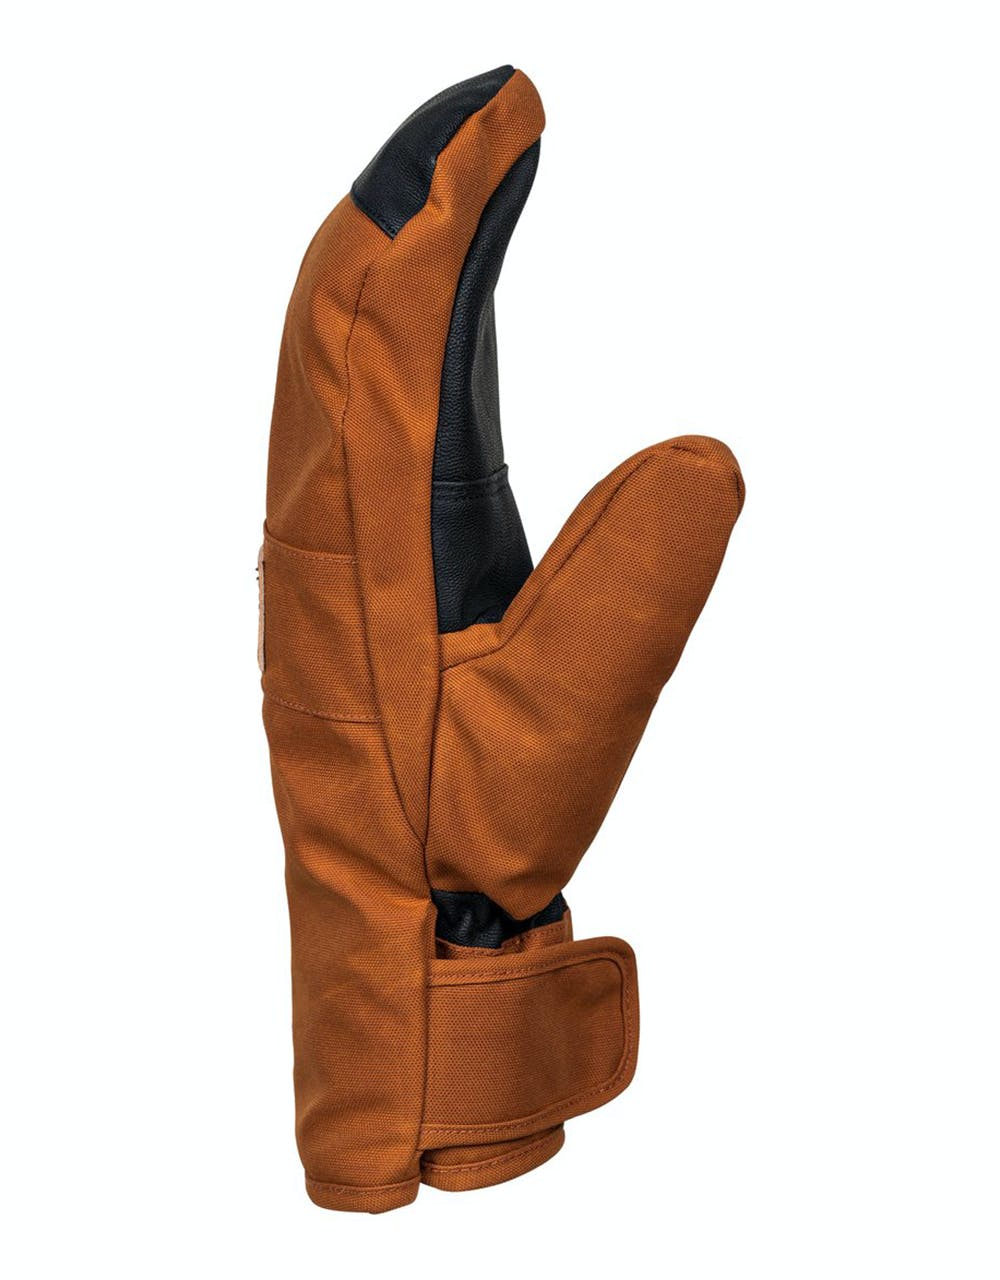 DC Franchise SE Snowboard Mitts - Leather Brown